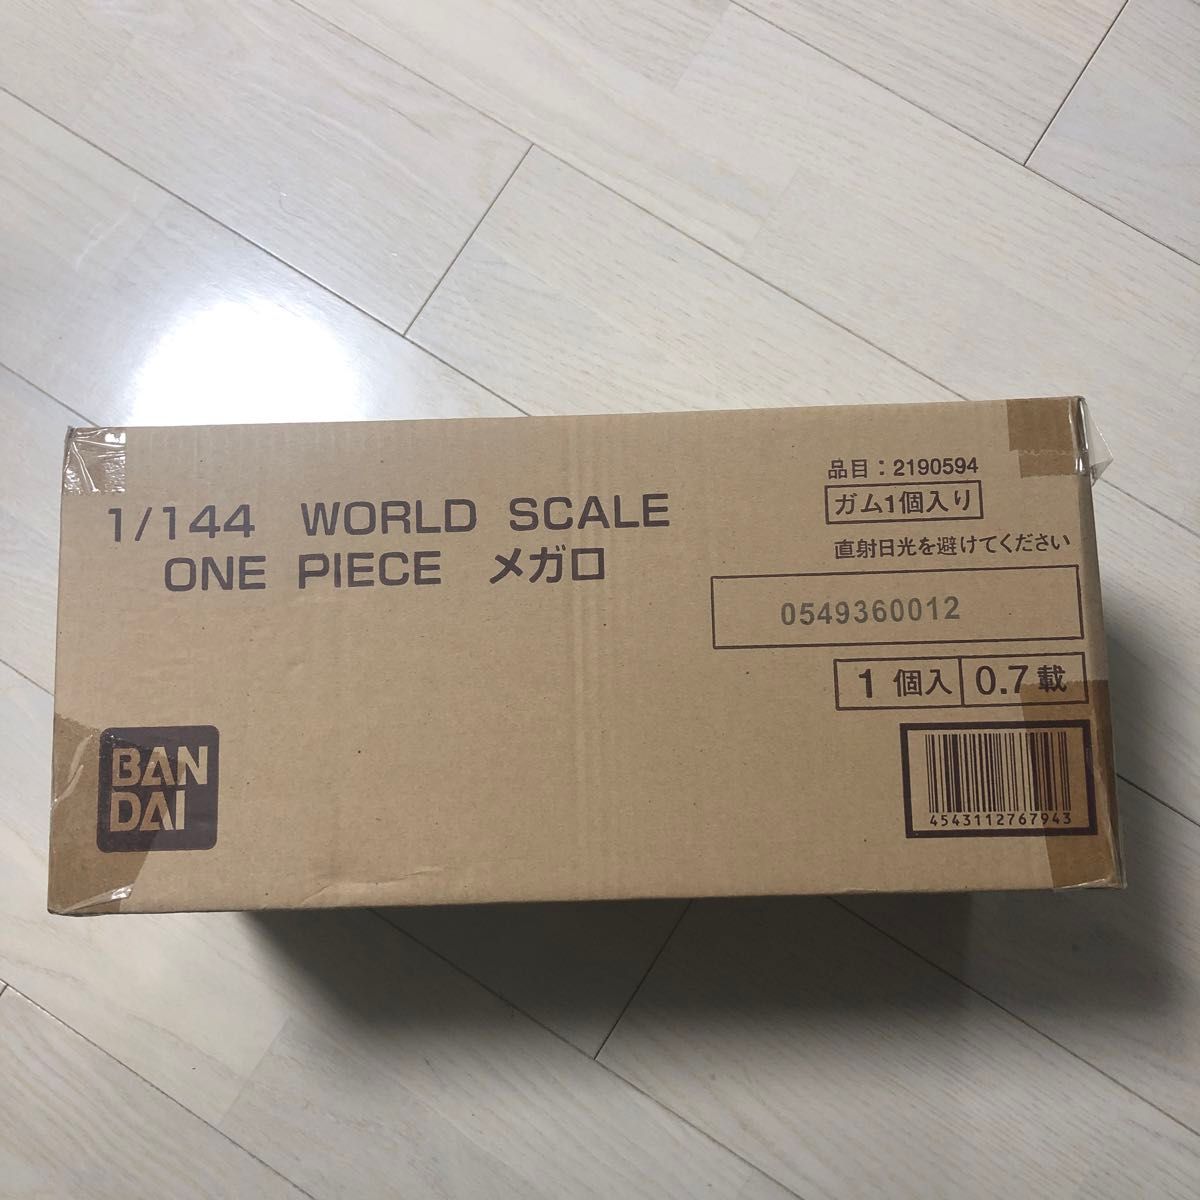 1/144 WORLD SCALE ONE PIECE メガロ